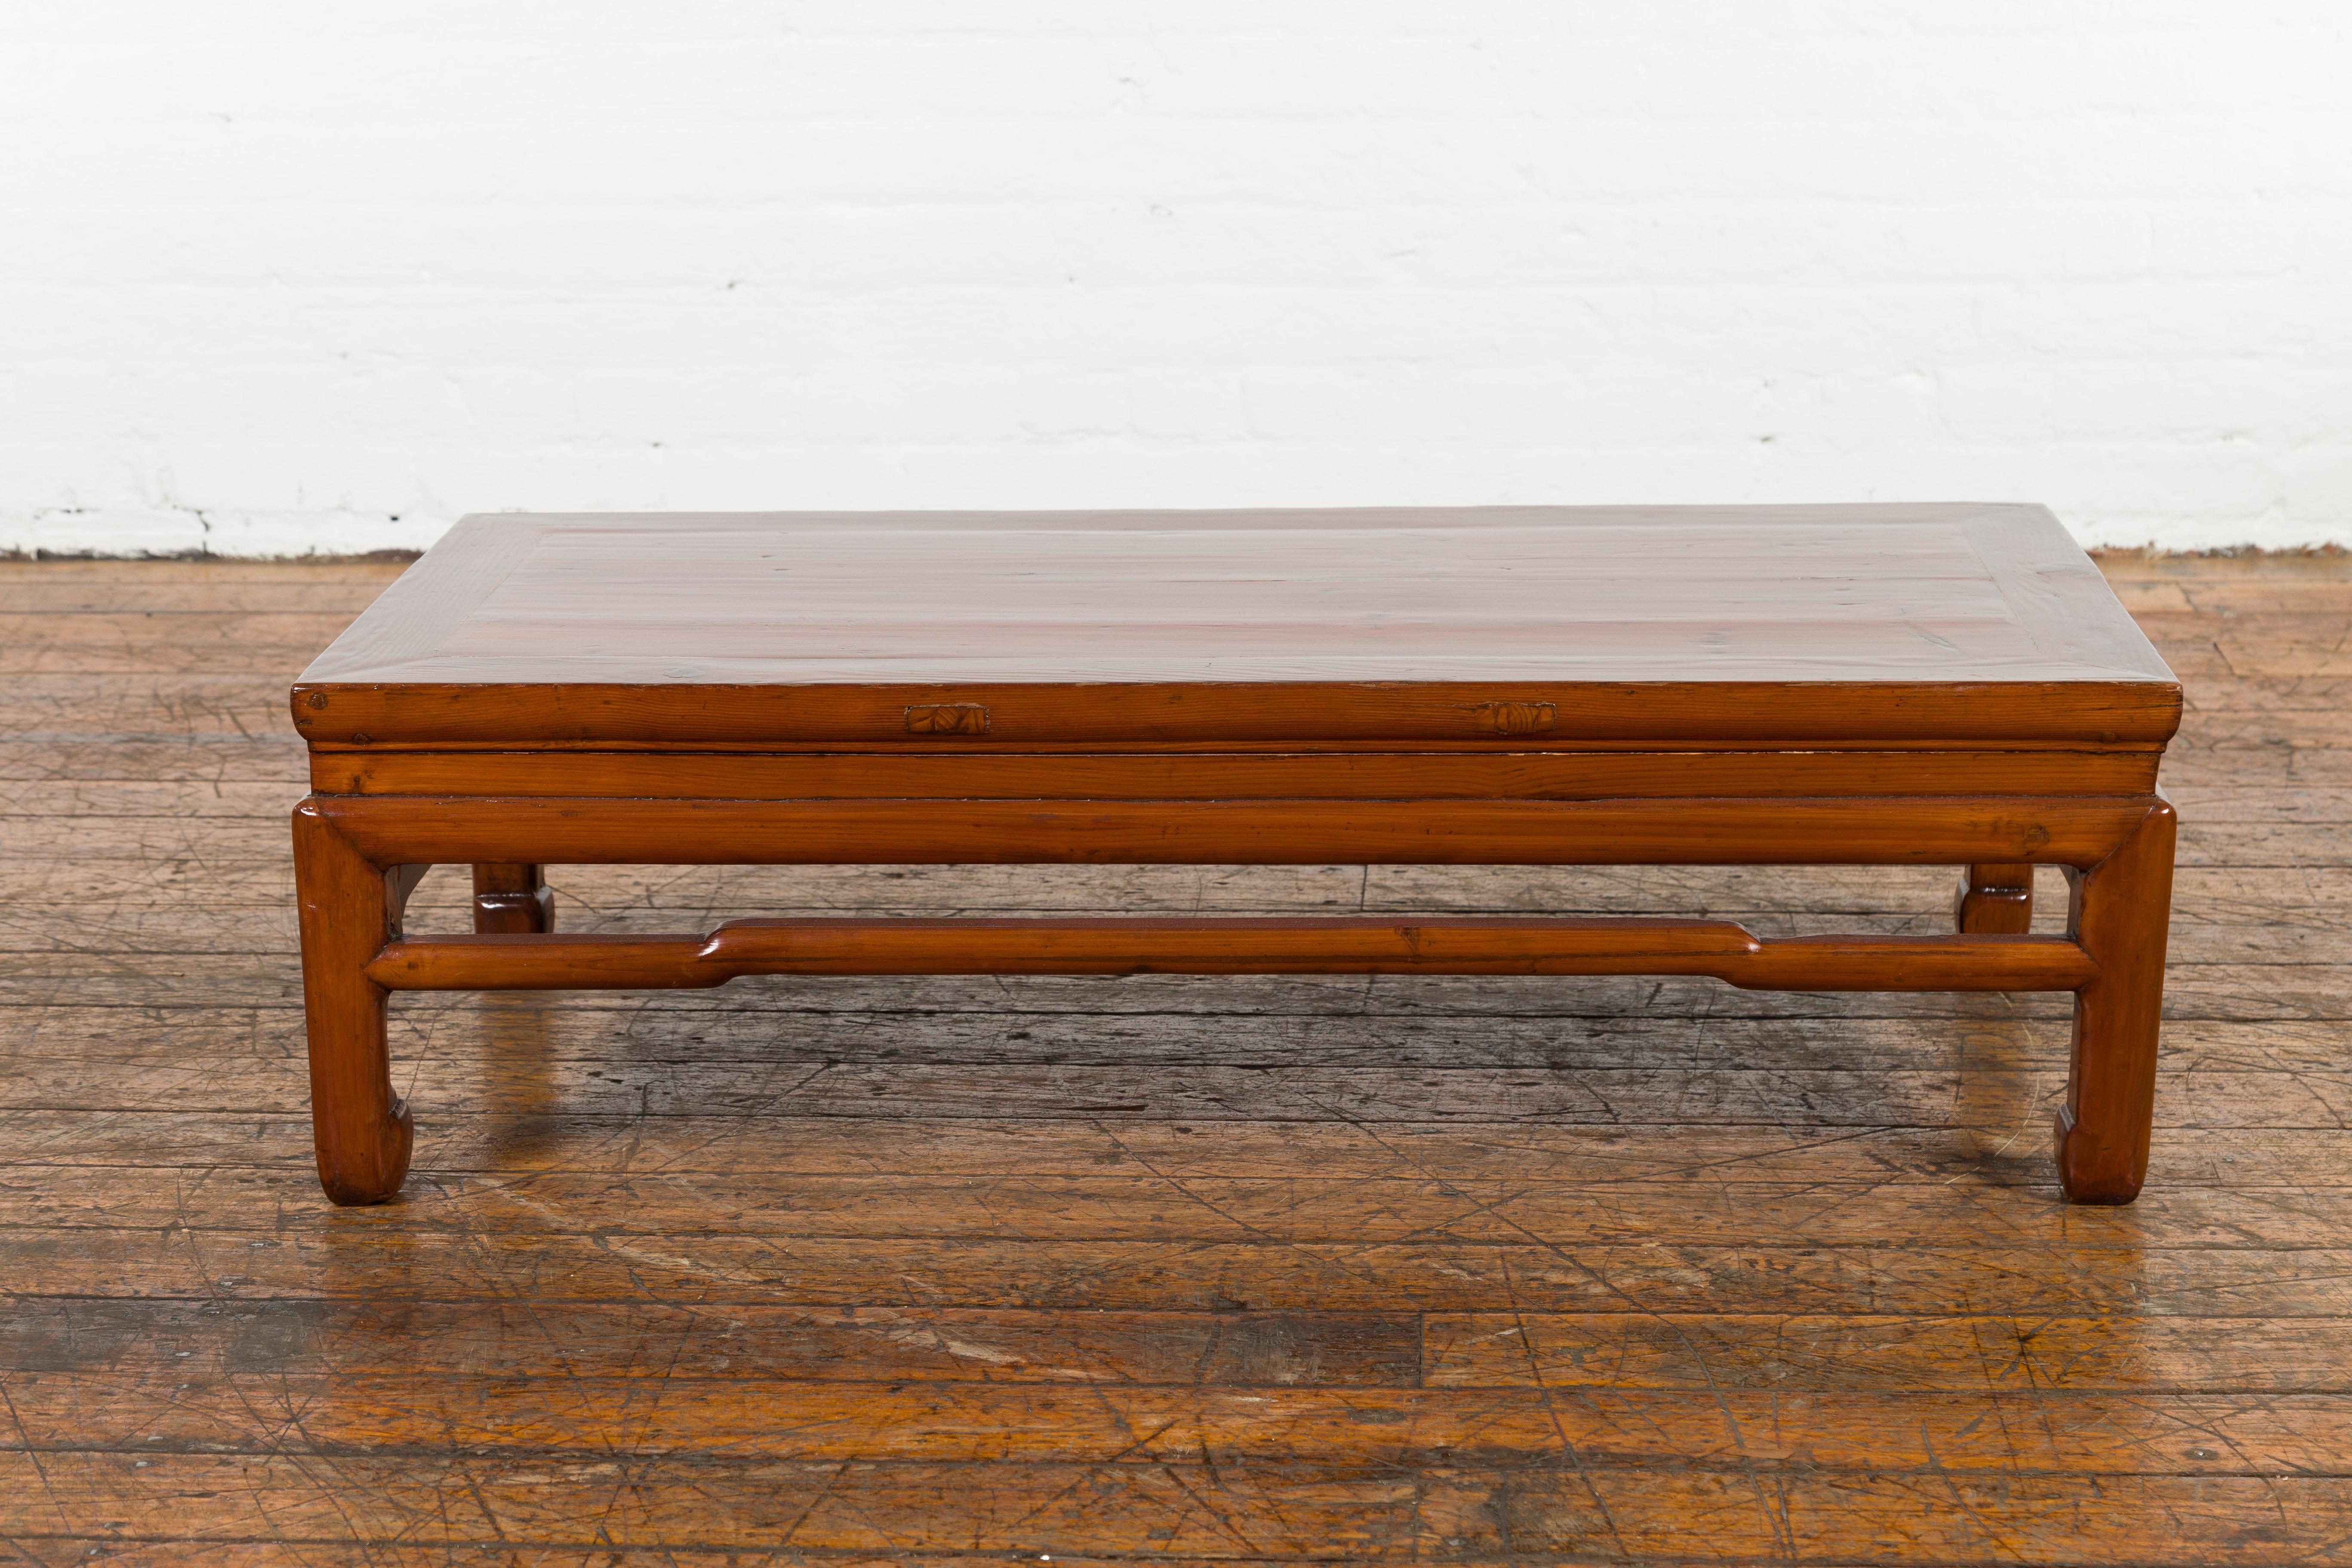 20th Century Chinese Late Qing Dynasty Period Low Kang Coffee Table with Brown Lacquer For Sale